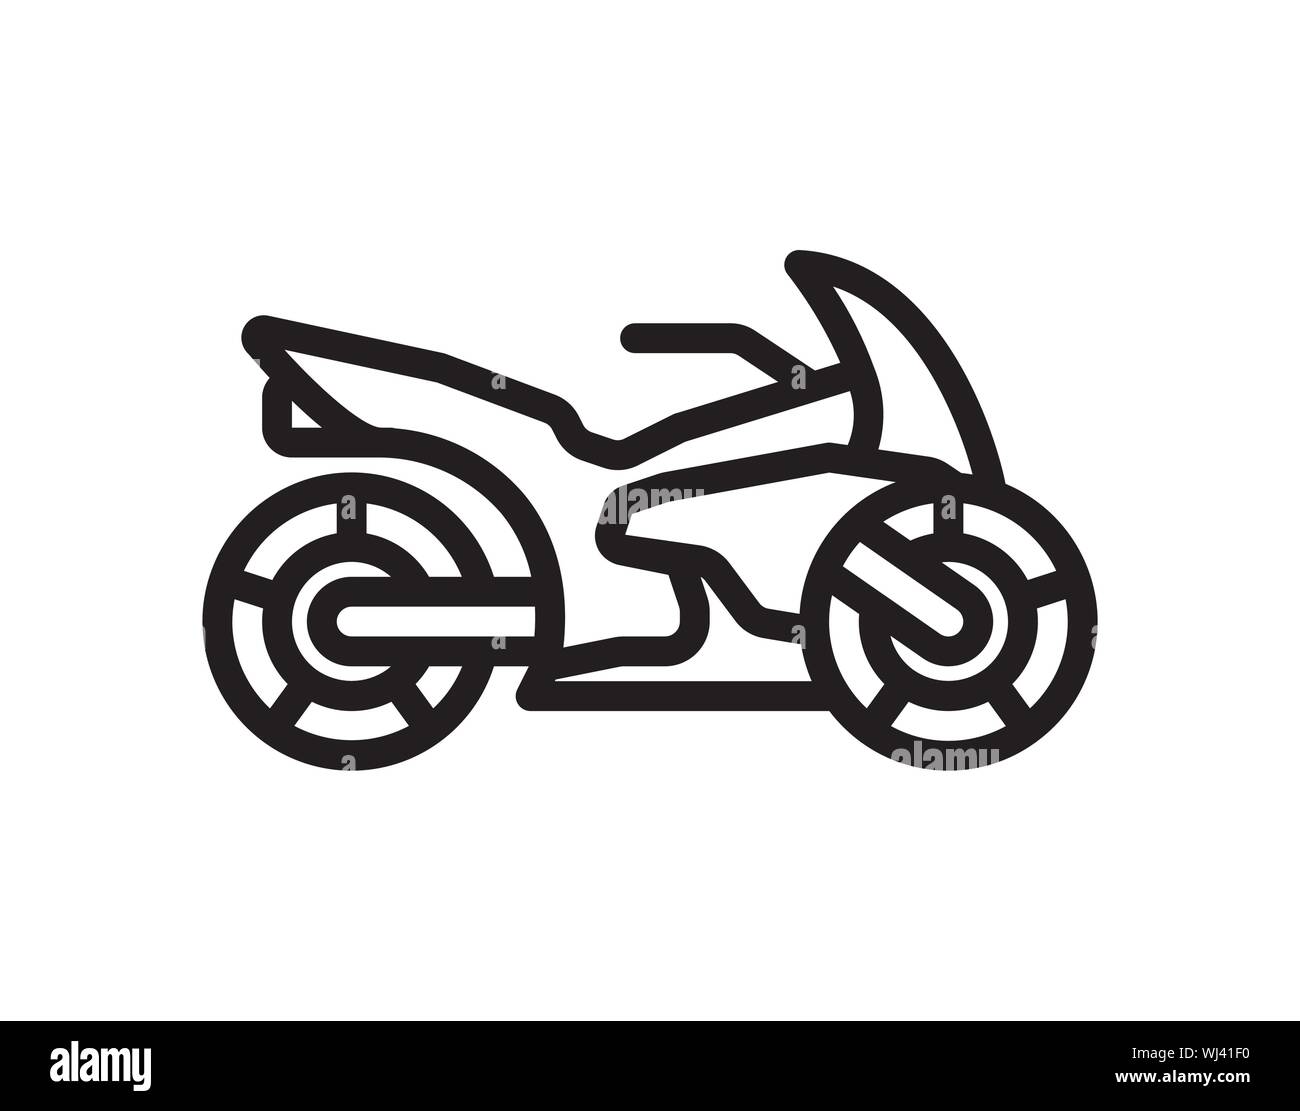 sport bike icon vector, illustration logo template in trendy style. Can be used for many purposes. Stock Vector